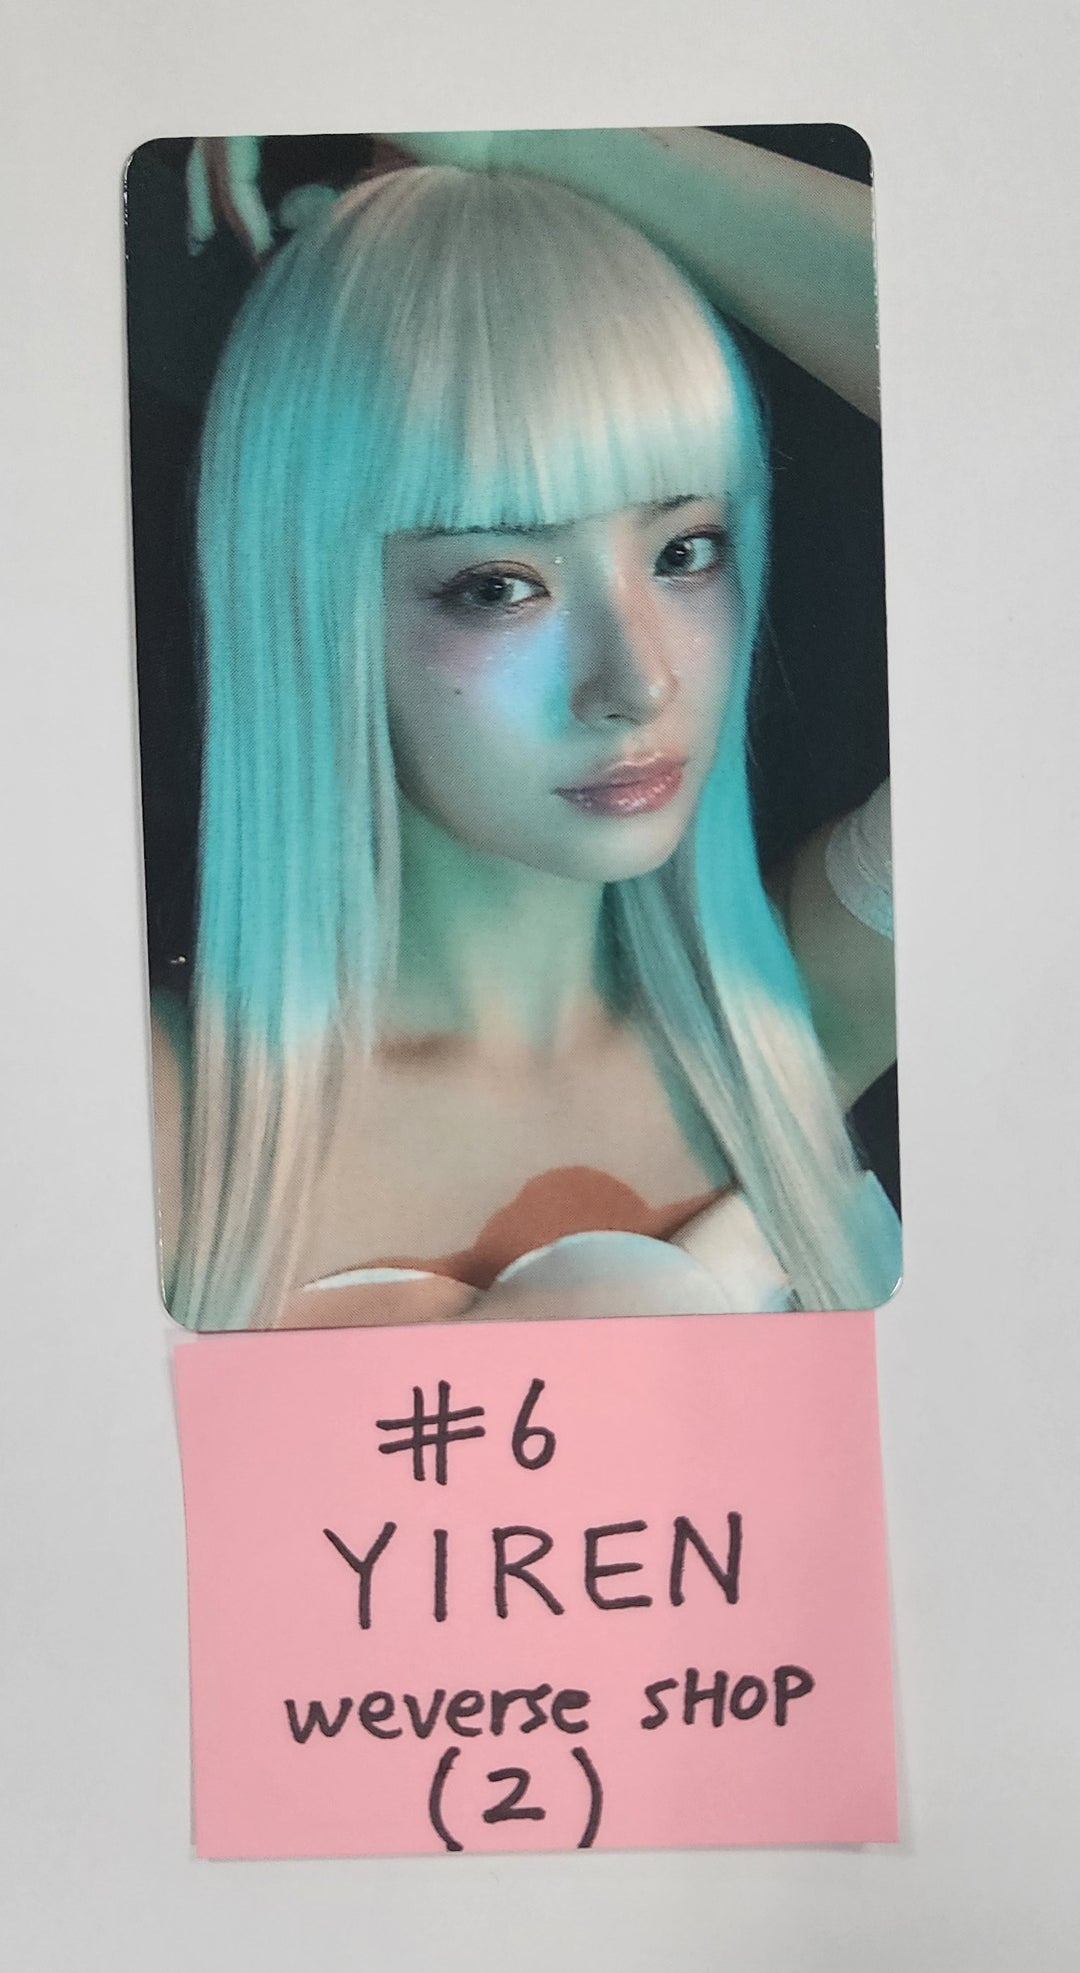 Everglow "ZOMBIE " - Weverse Shop Pre-Order Benefit Photocard [24.6.12]